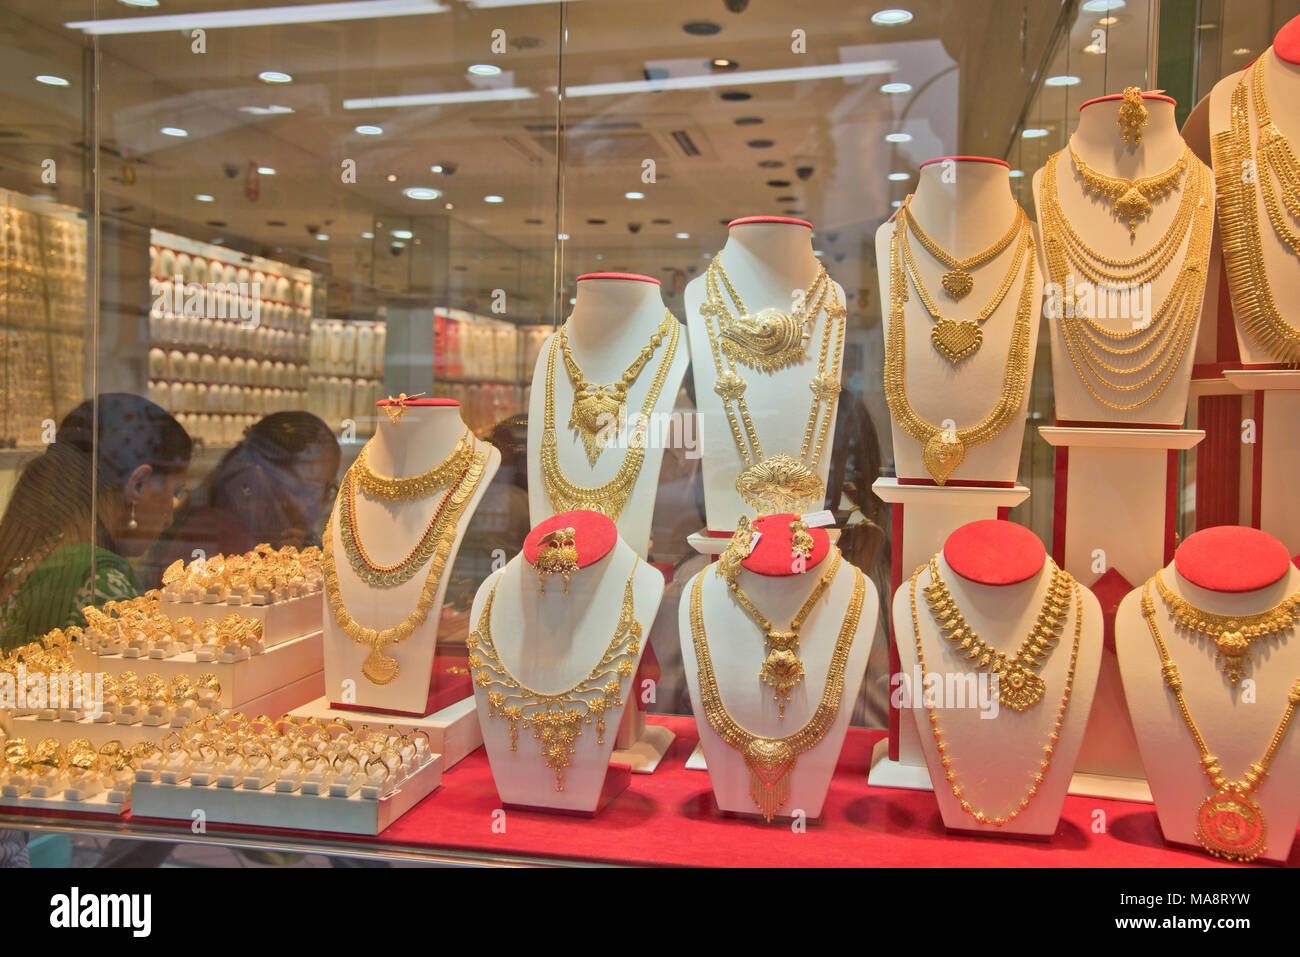 Gold and jewellery shop in Little India, Singapore Stock Photo - Alamy